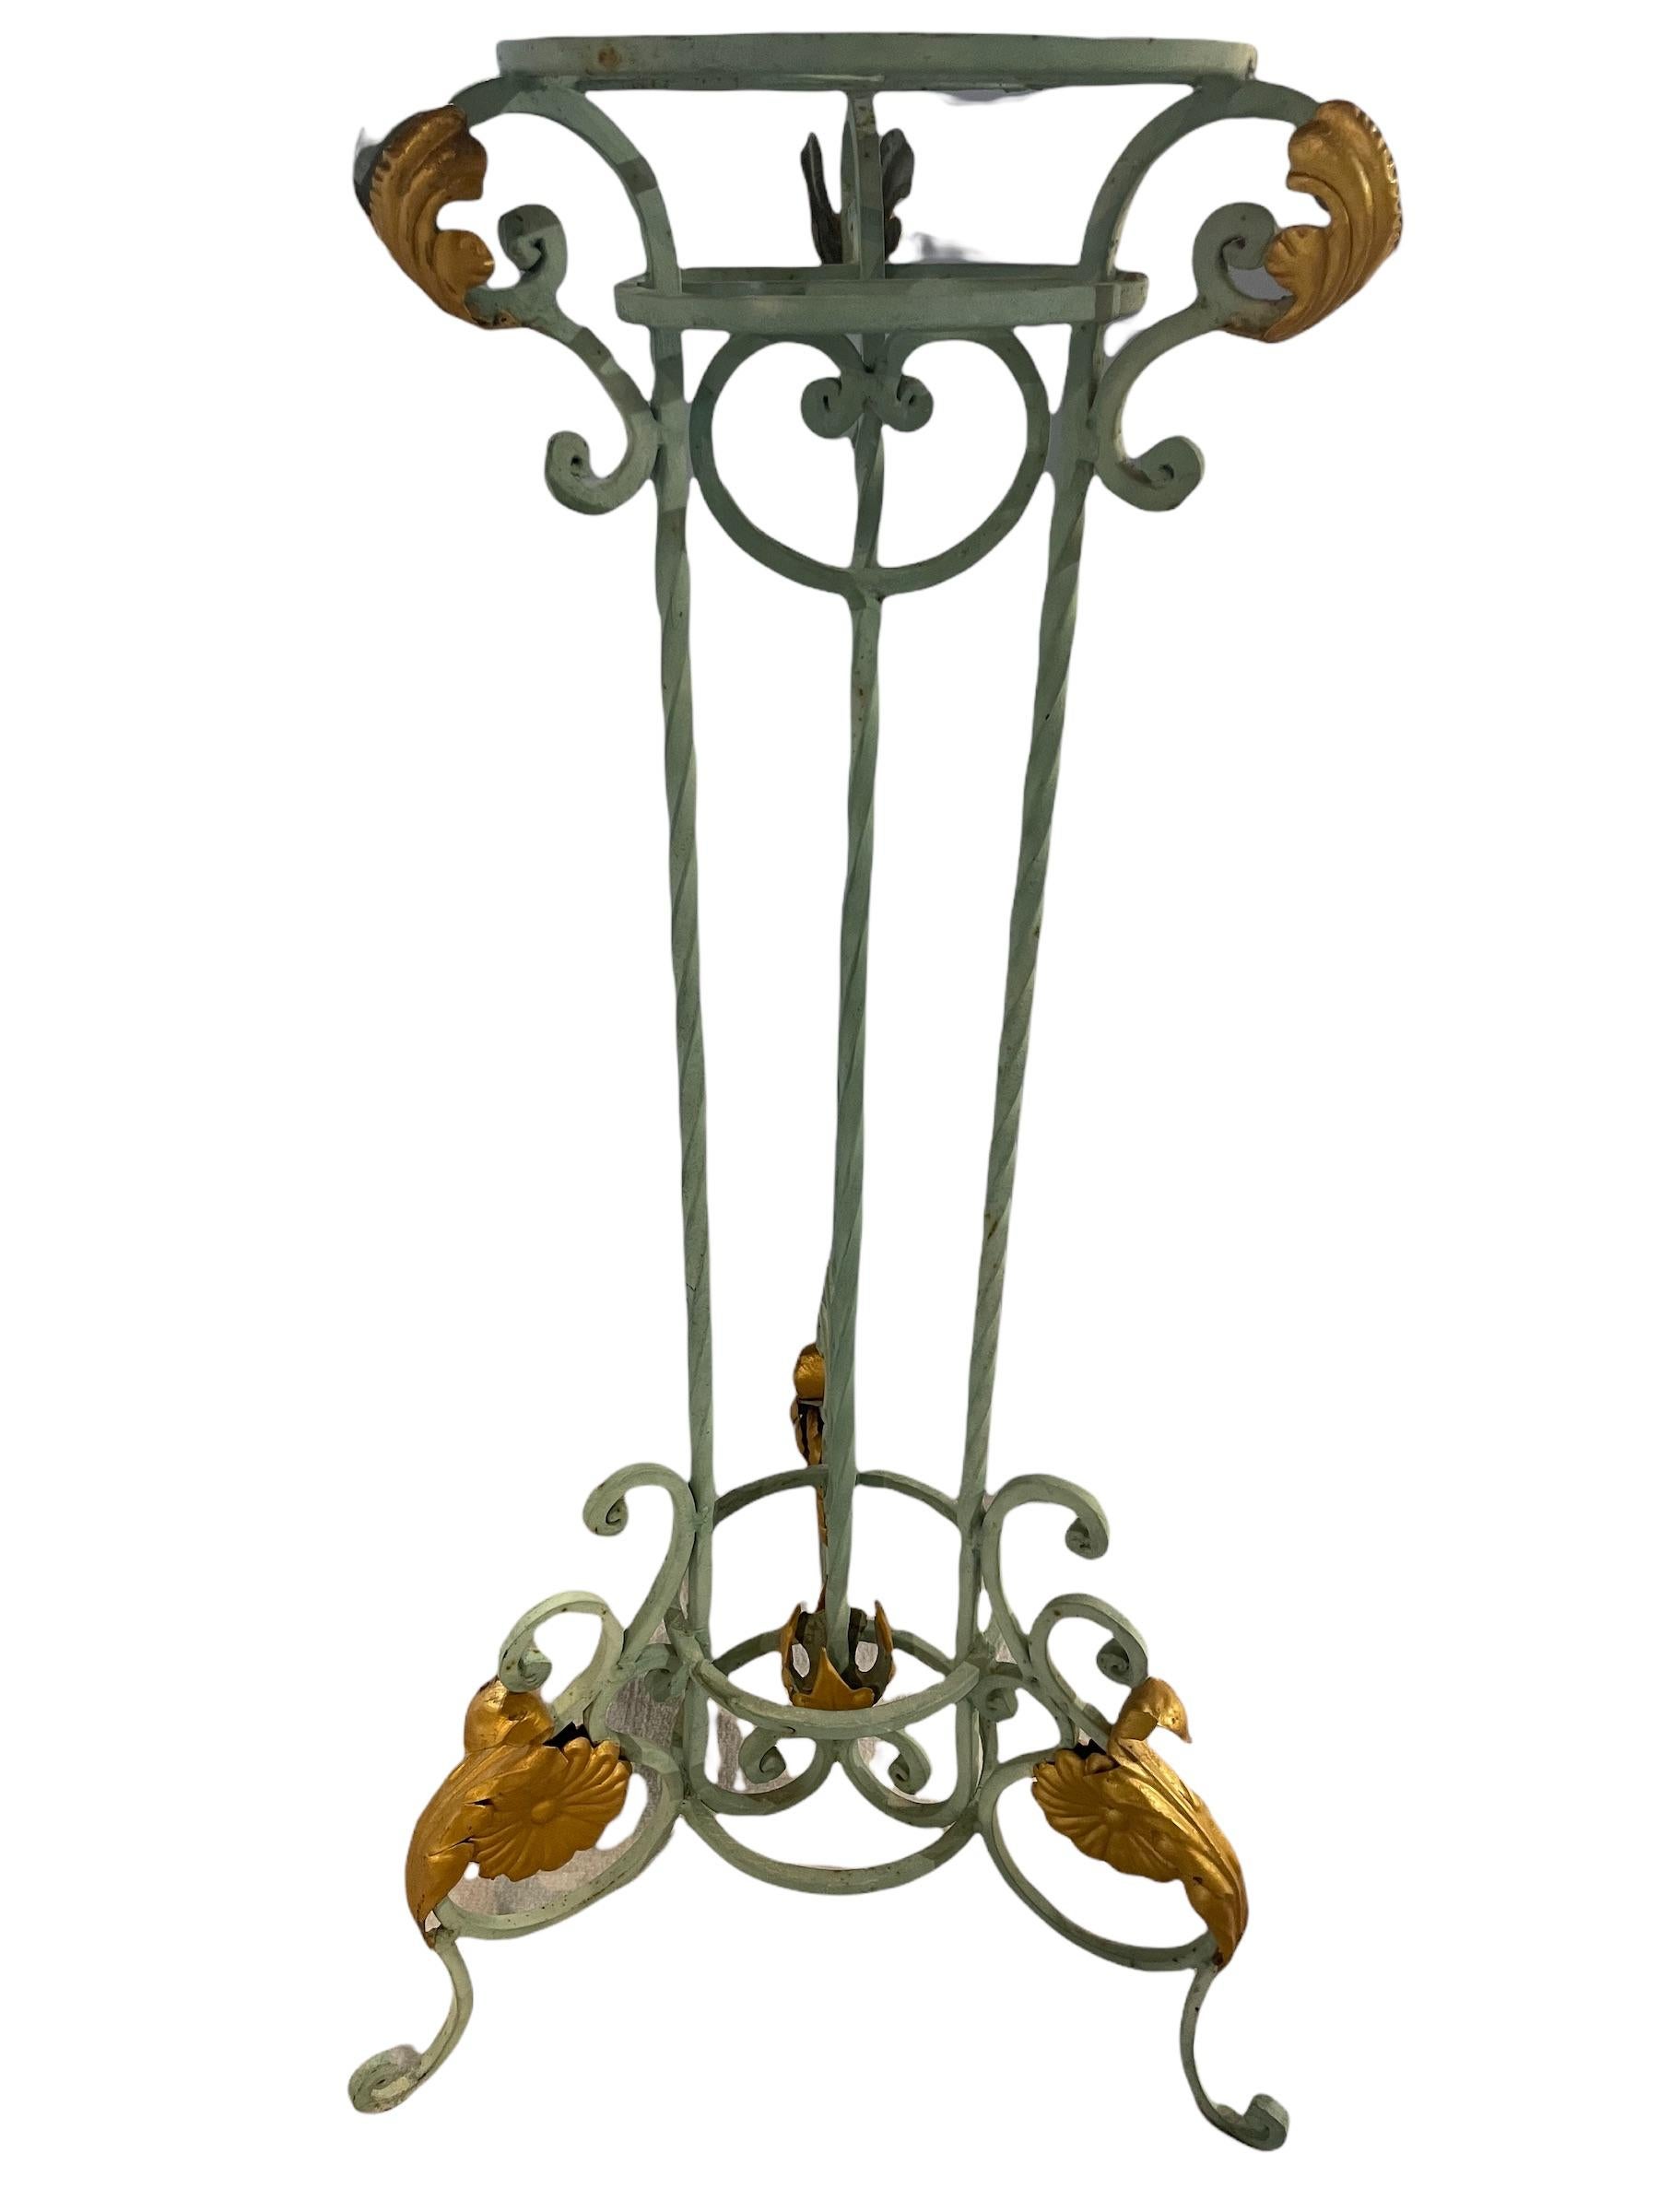 Spectacular french wrought iron plant stand featuring a rich gold acanthus metal ?nish. They will bring elegance and nobility to a quality residence.